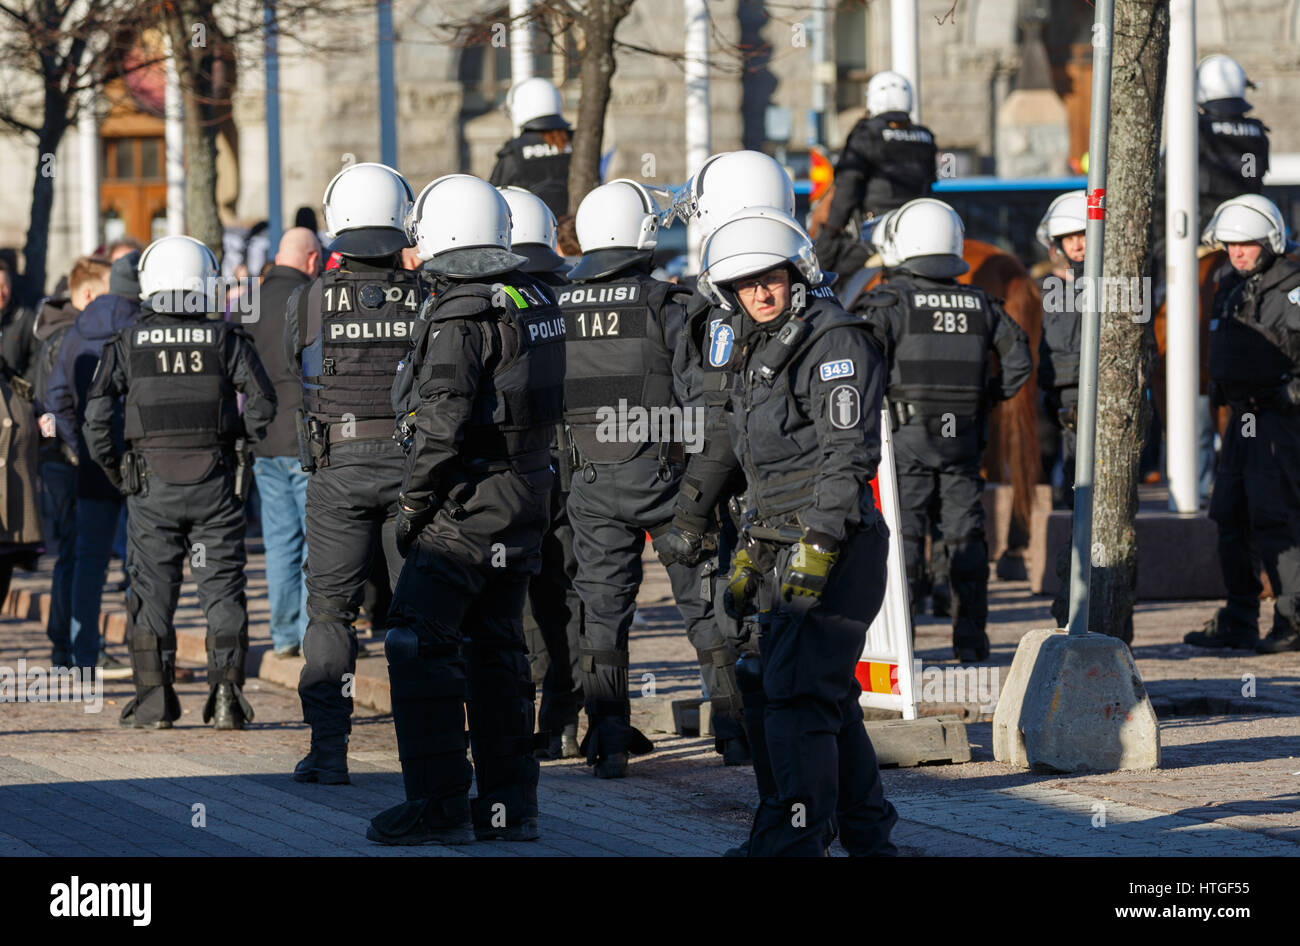 Police presence at the demonstrations of 11th March 2017 at Helsinki Railway Station Square Stock Photo